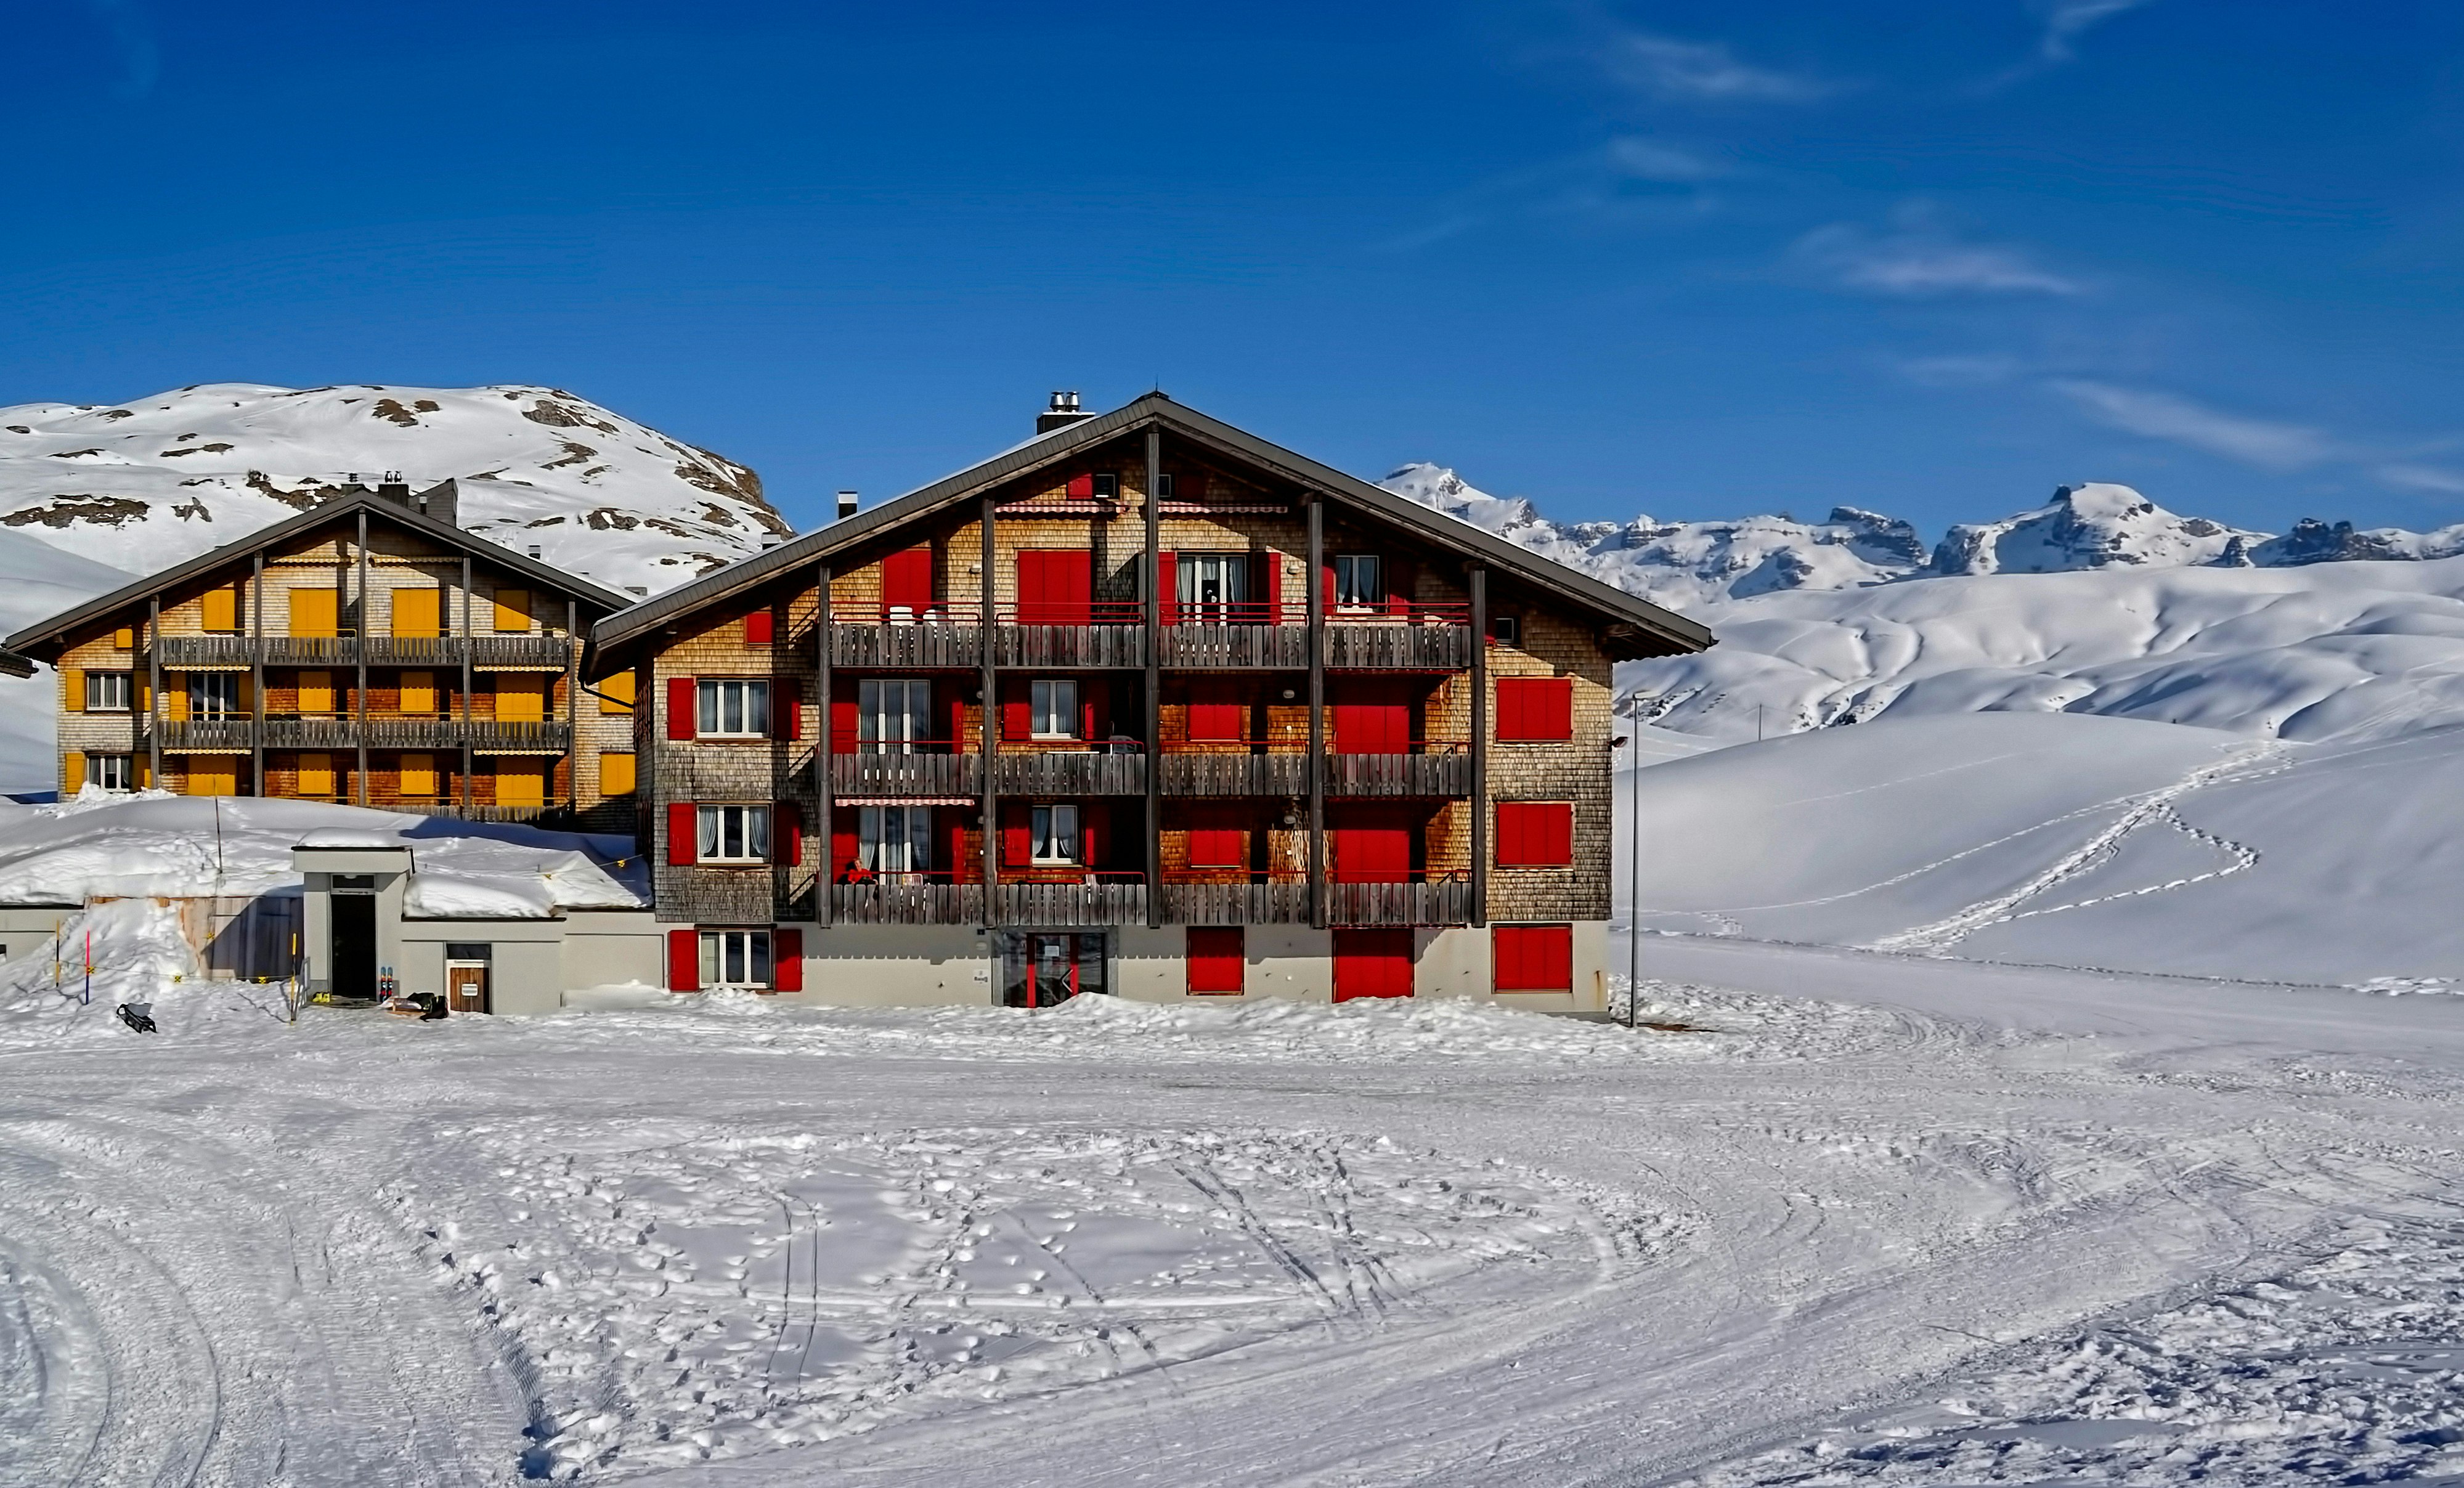 two red and yellow houses surrounded by snowfield at daytime